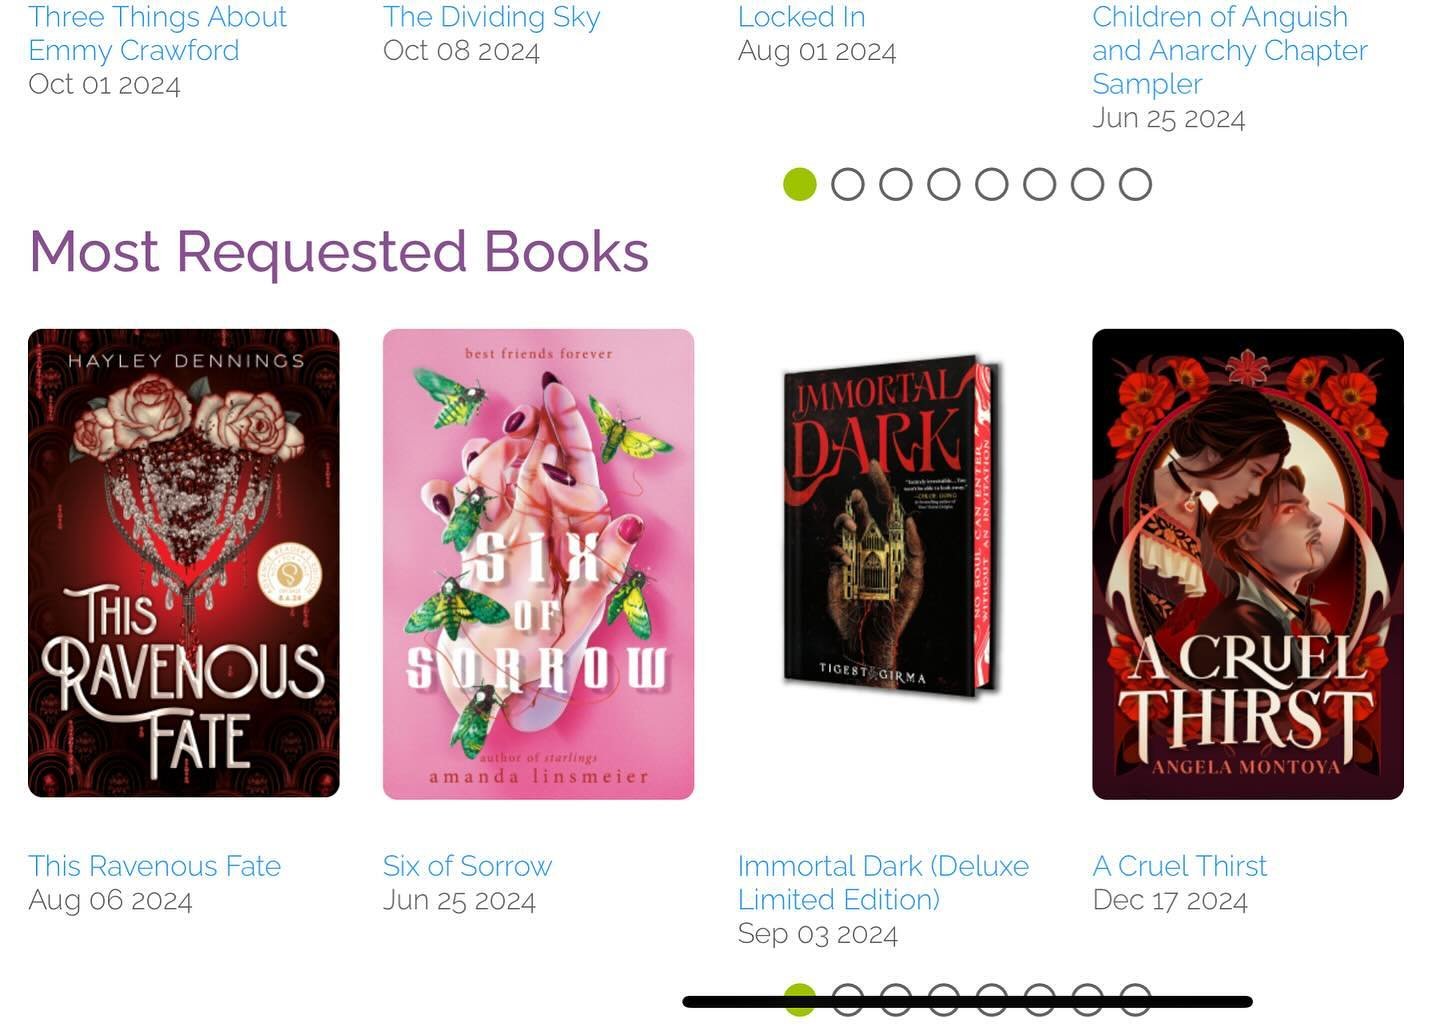 Thanks to you, A CRUEL THIRST has landed in the &ldquo;most requested&rdquo; category in YA! 

Happy to see Carolina and Lalo up there with two other amazing vampire books coming this year by @pagesofhayley and @tigestgirma !!!

All three of these bo